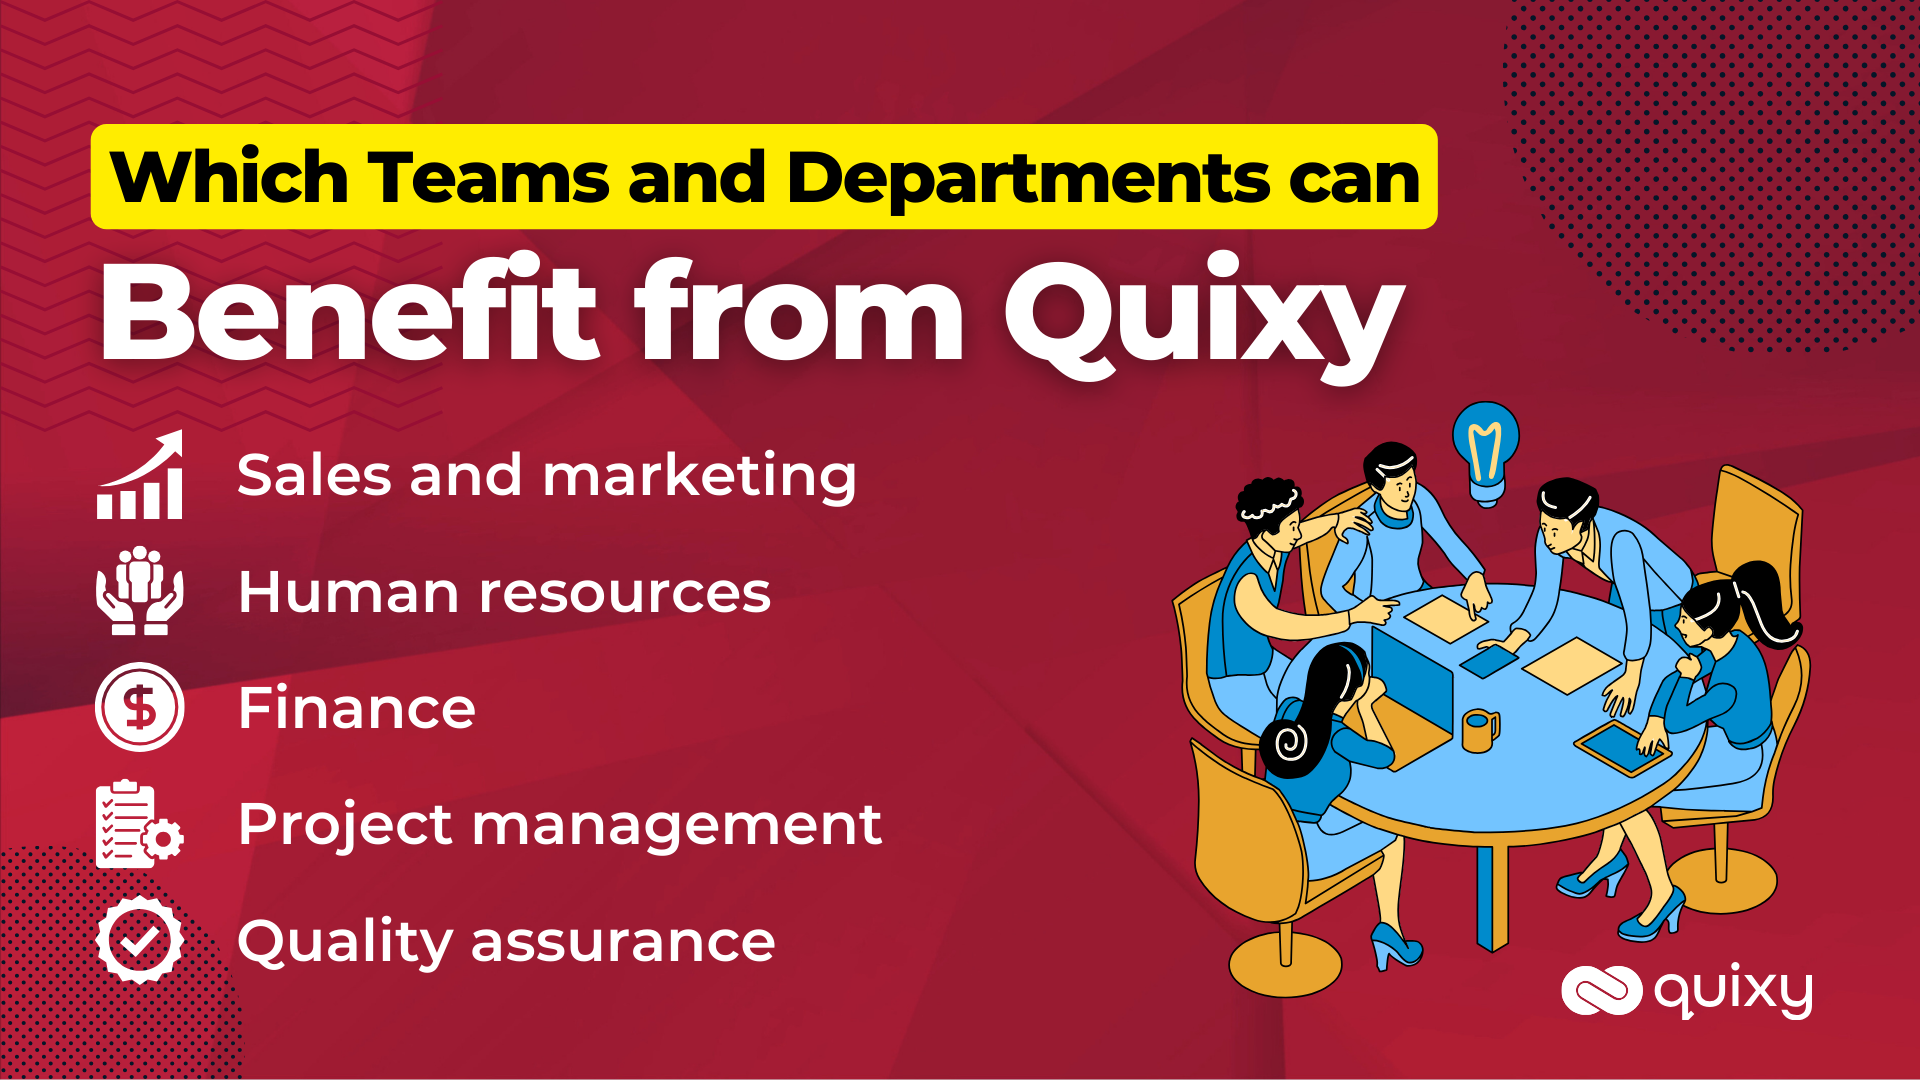 Which teams and departments can benefit from Quixy